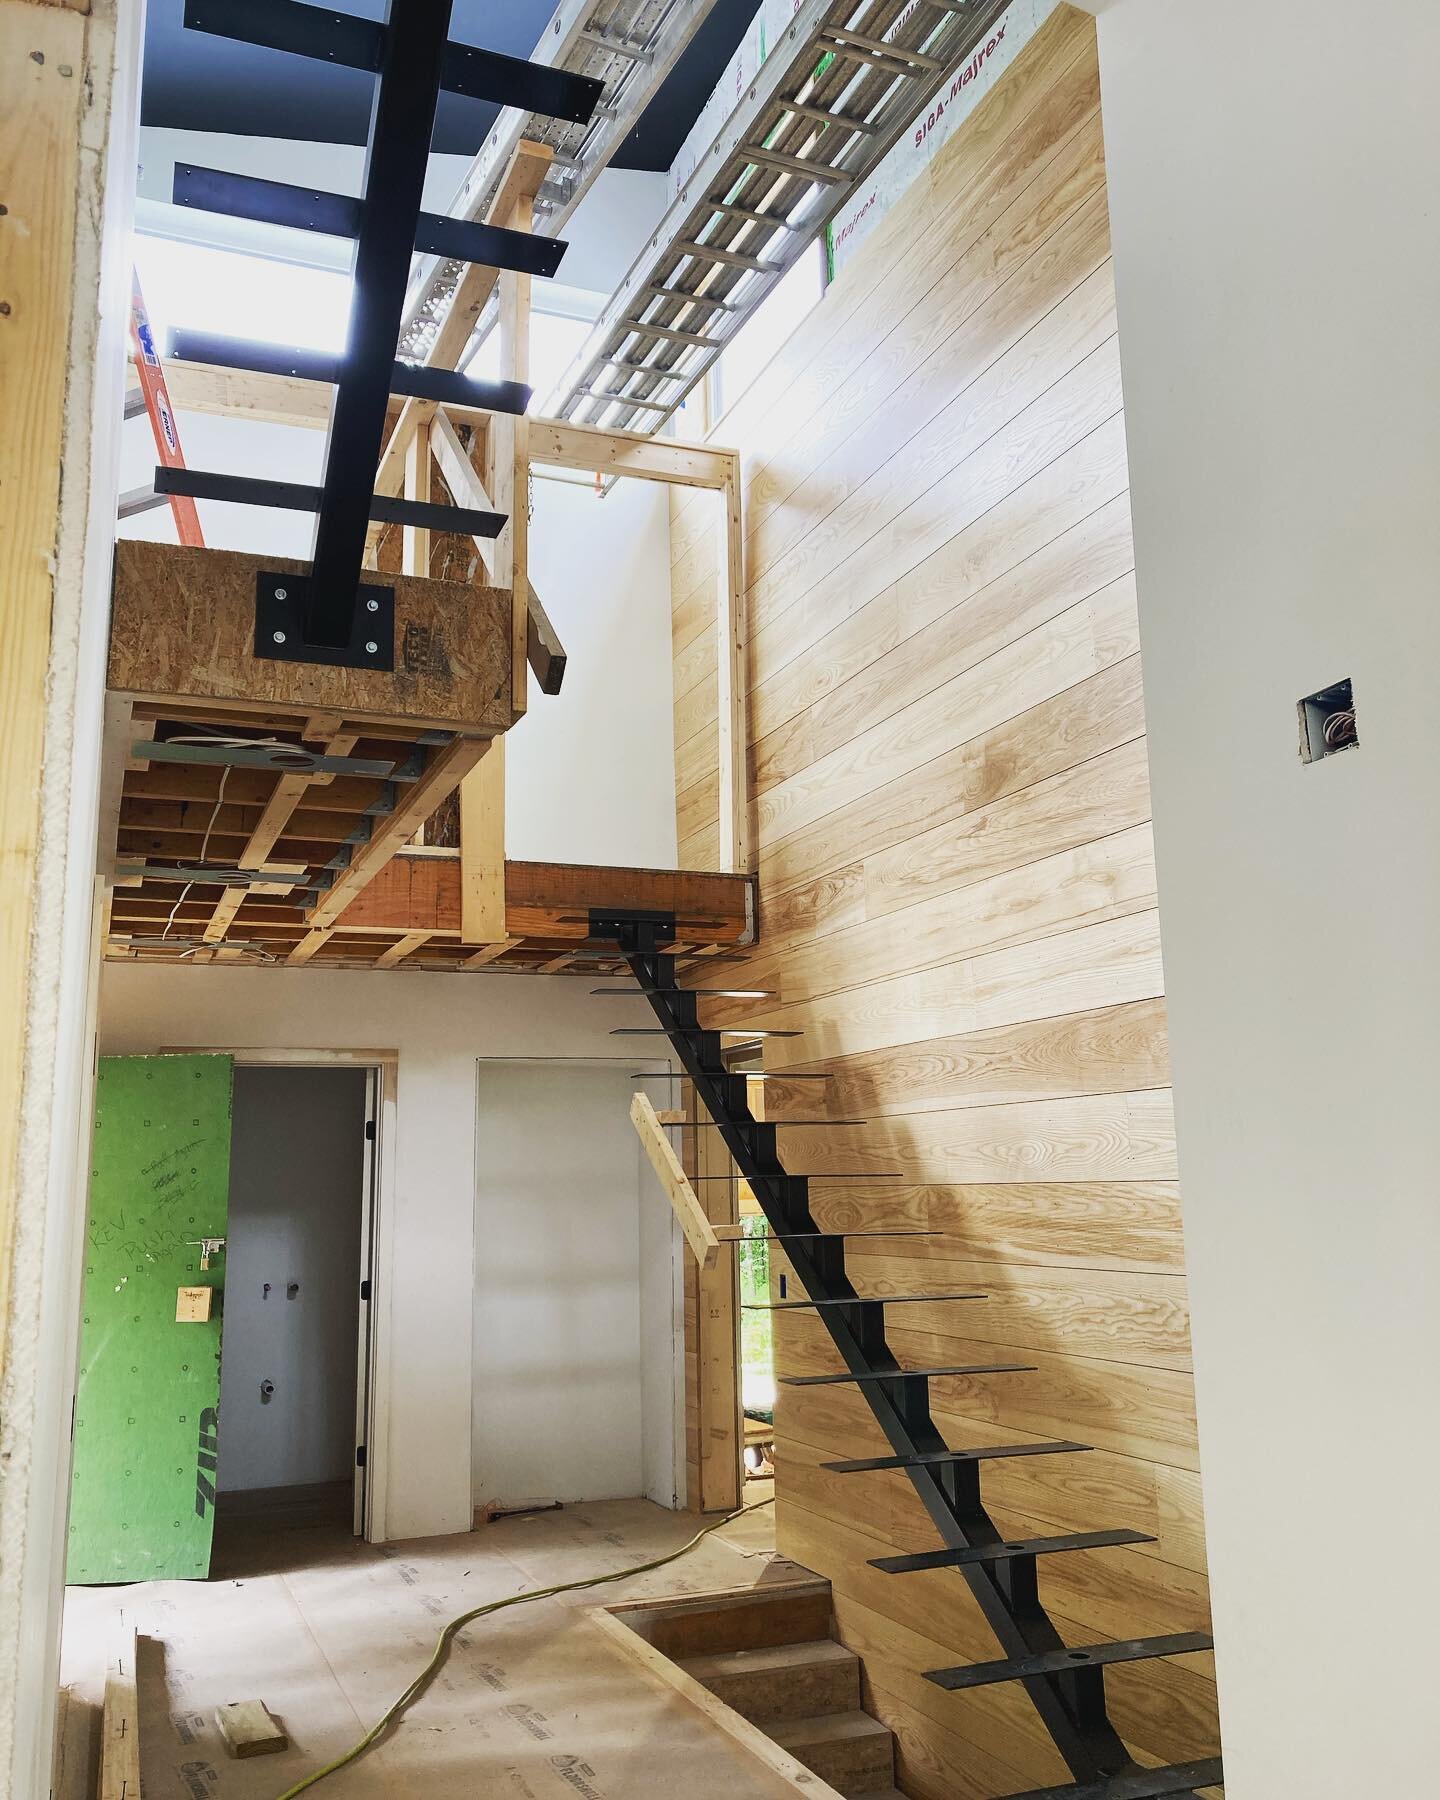 Stair skeleton installed in yarmouth today.  Designed by BriBurn Architecture and contracted by Sylvain and Sevigny Builders. Next up, 4&rdquo; thick wood treads and blackened steel rod and flat bar handrail.  @briburn_architecture @sylvainsevigny